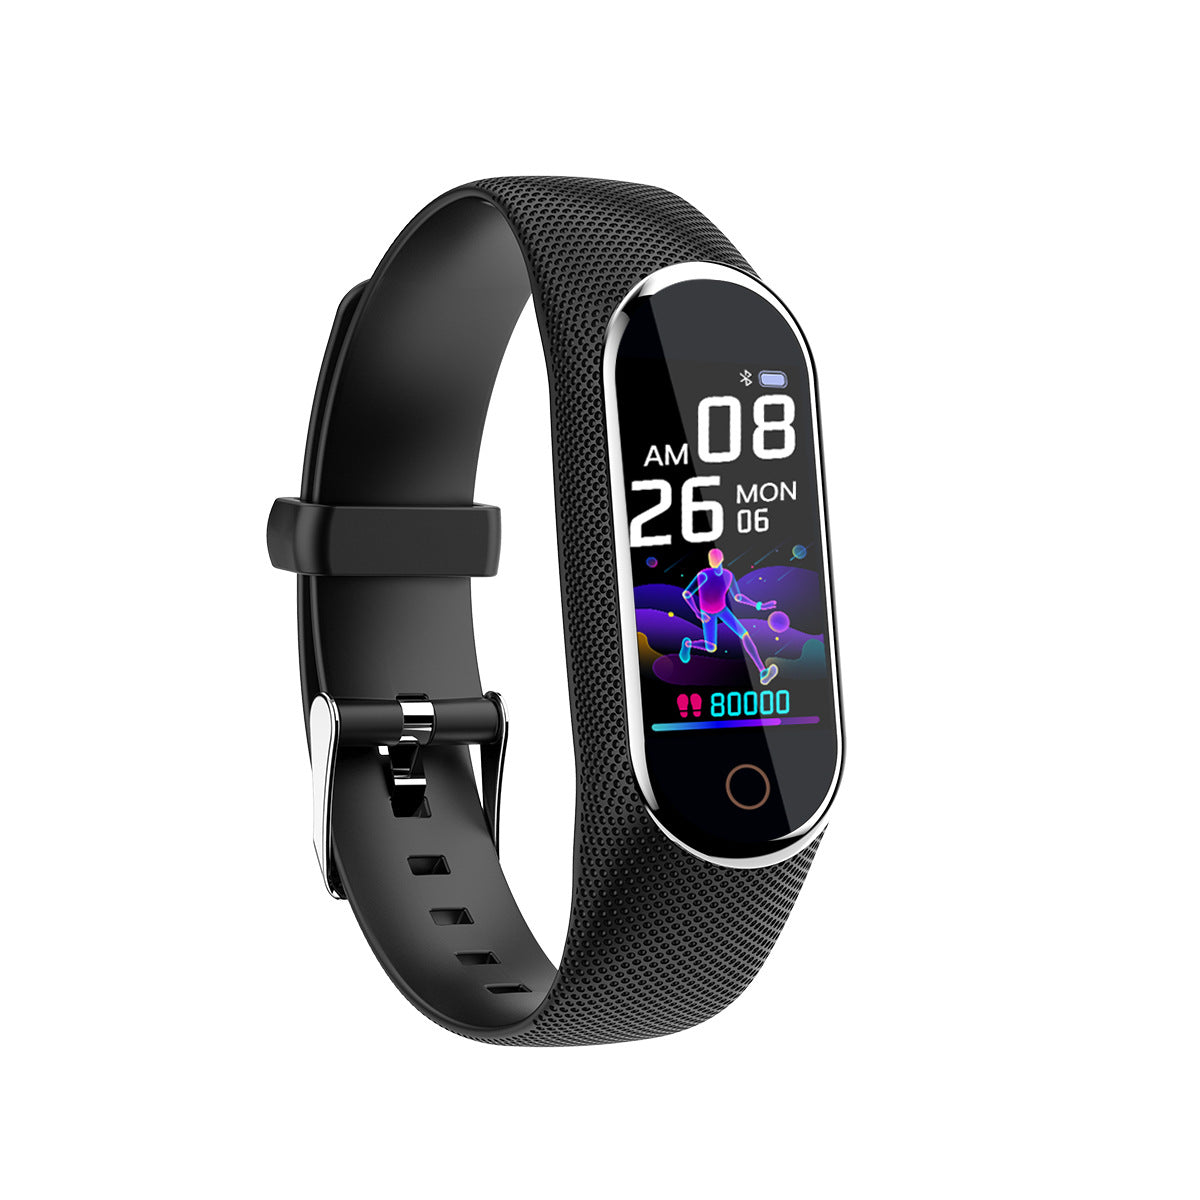       New M8 Smart Bracelet with ECG, Heart Rate, and Sleep Monitoring – BEAUTY NET